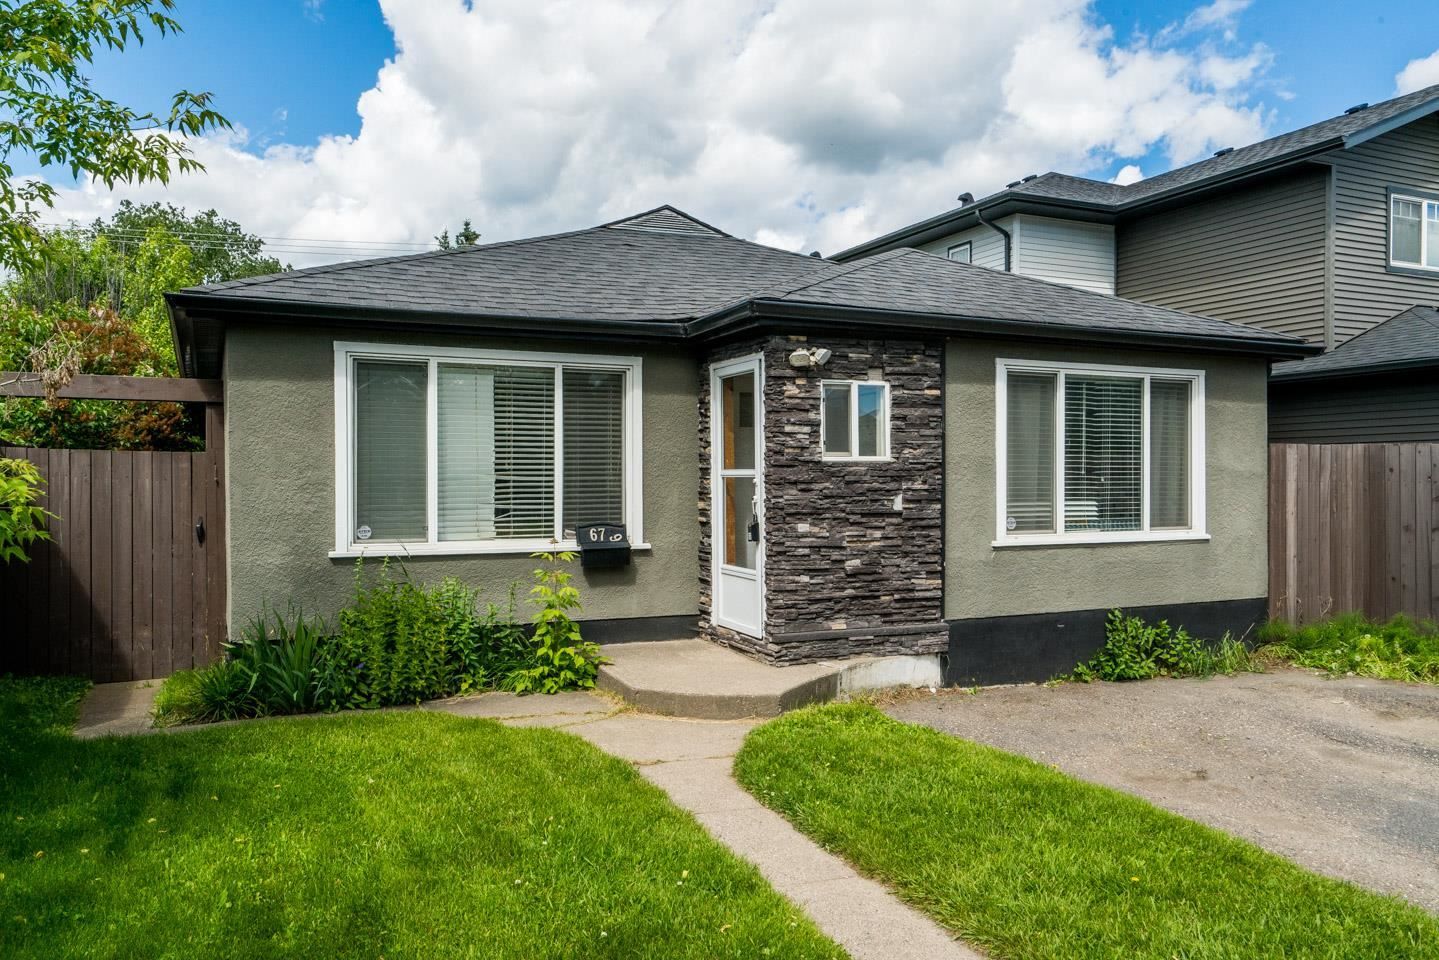 Main Photo: 679 CARNEY Street in Prince George: Central House for sale (PG City Central (Zone 72))  : MLS®# R2593738